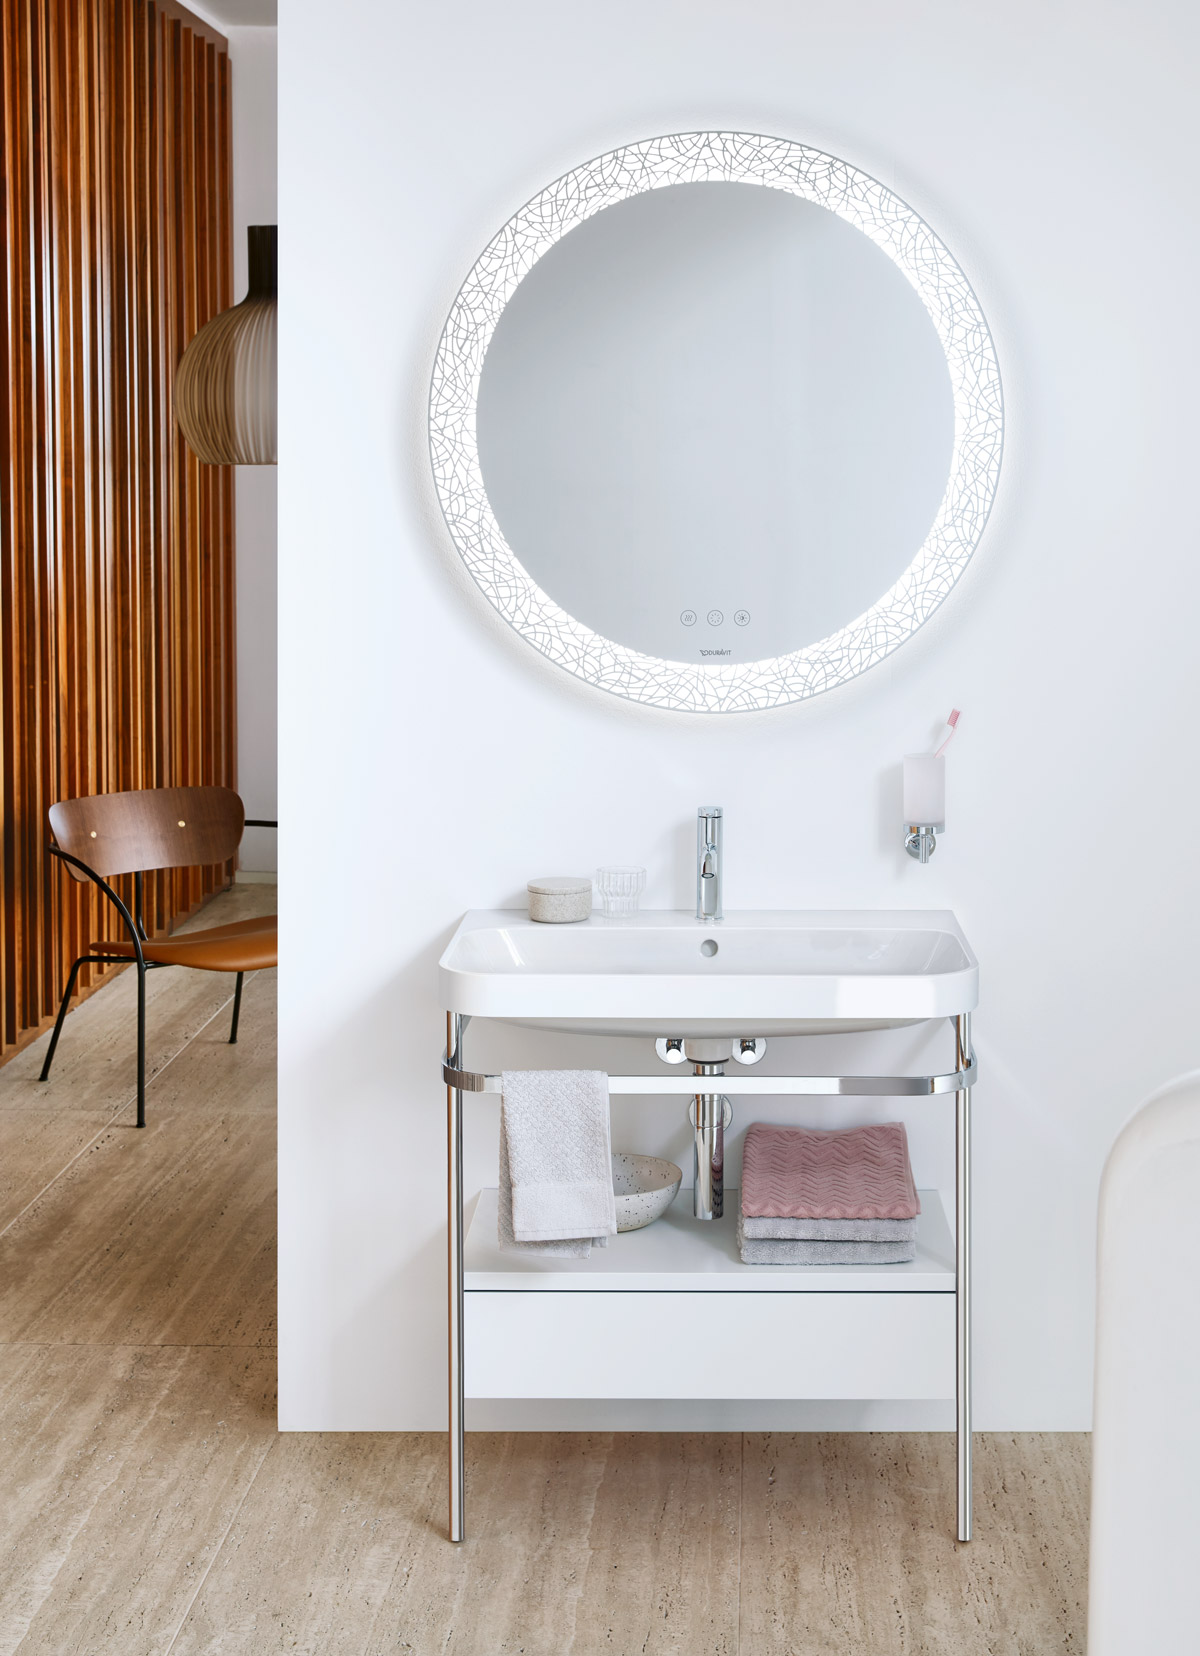 Furniture washbasin c-shaped in front of Happy D.2 Plus mirror
